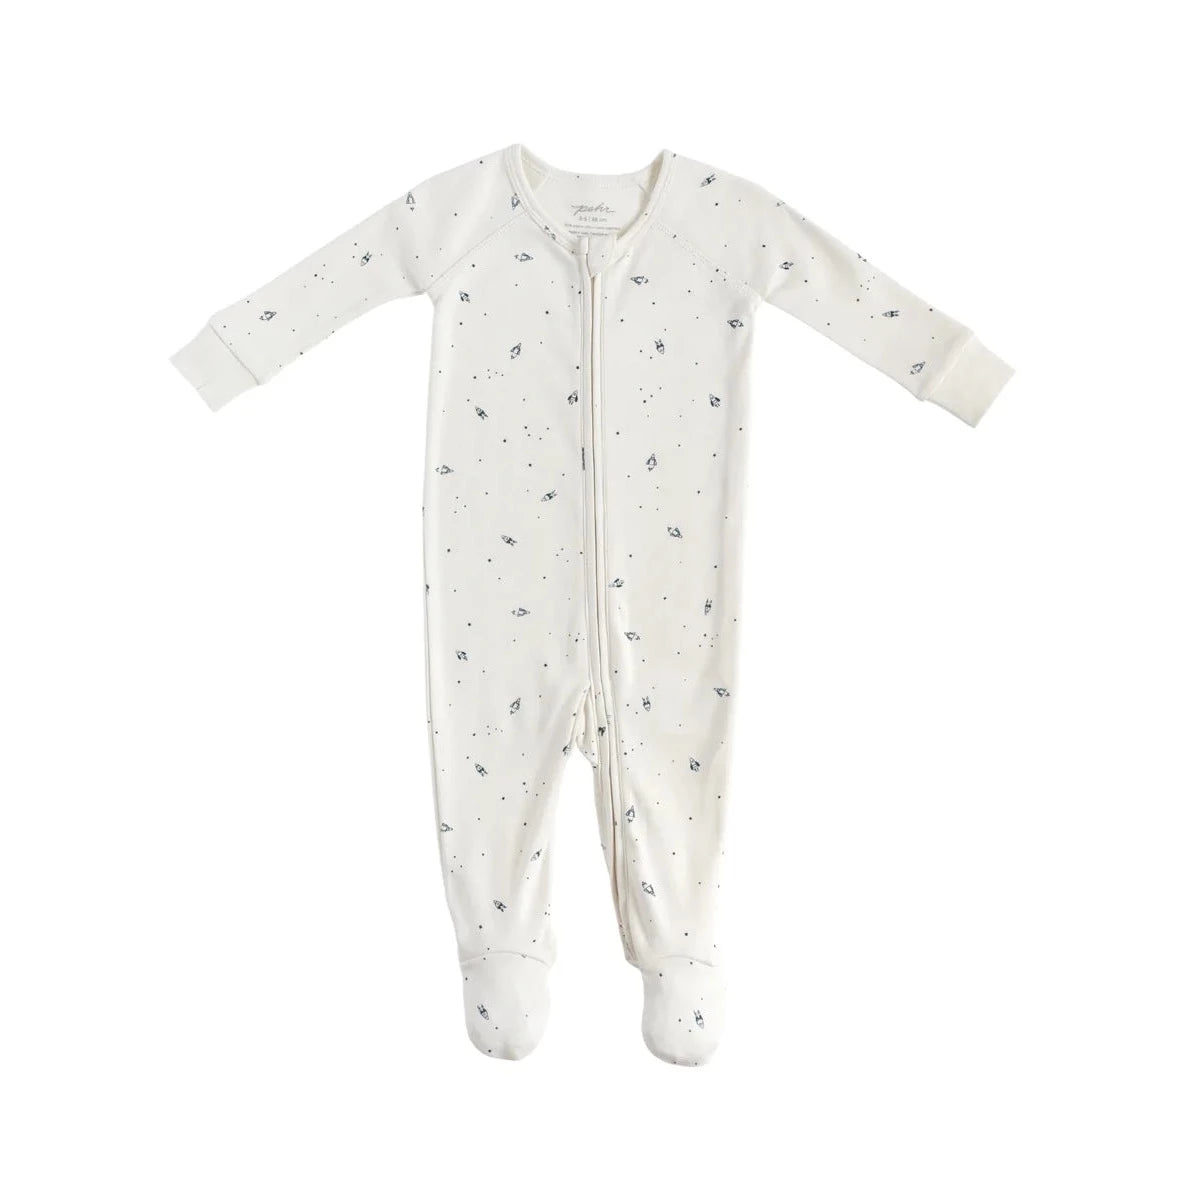 white footsie pajama slipper with tiny blue rockets and stars printed all over it. has a zipper running through the middle